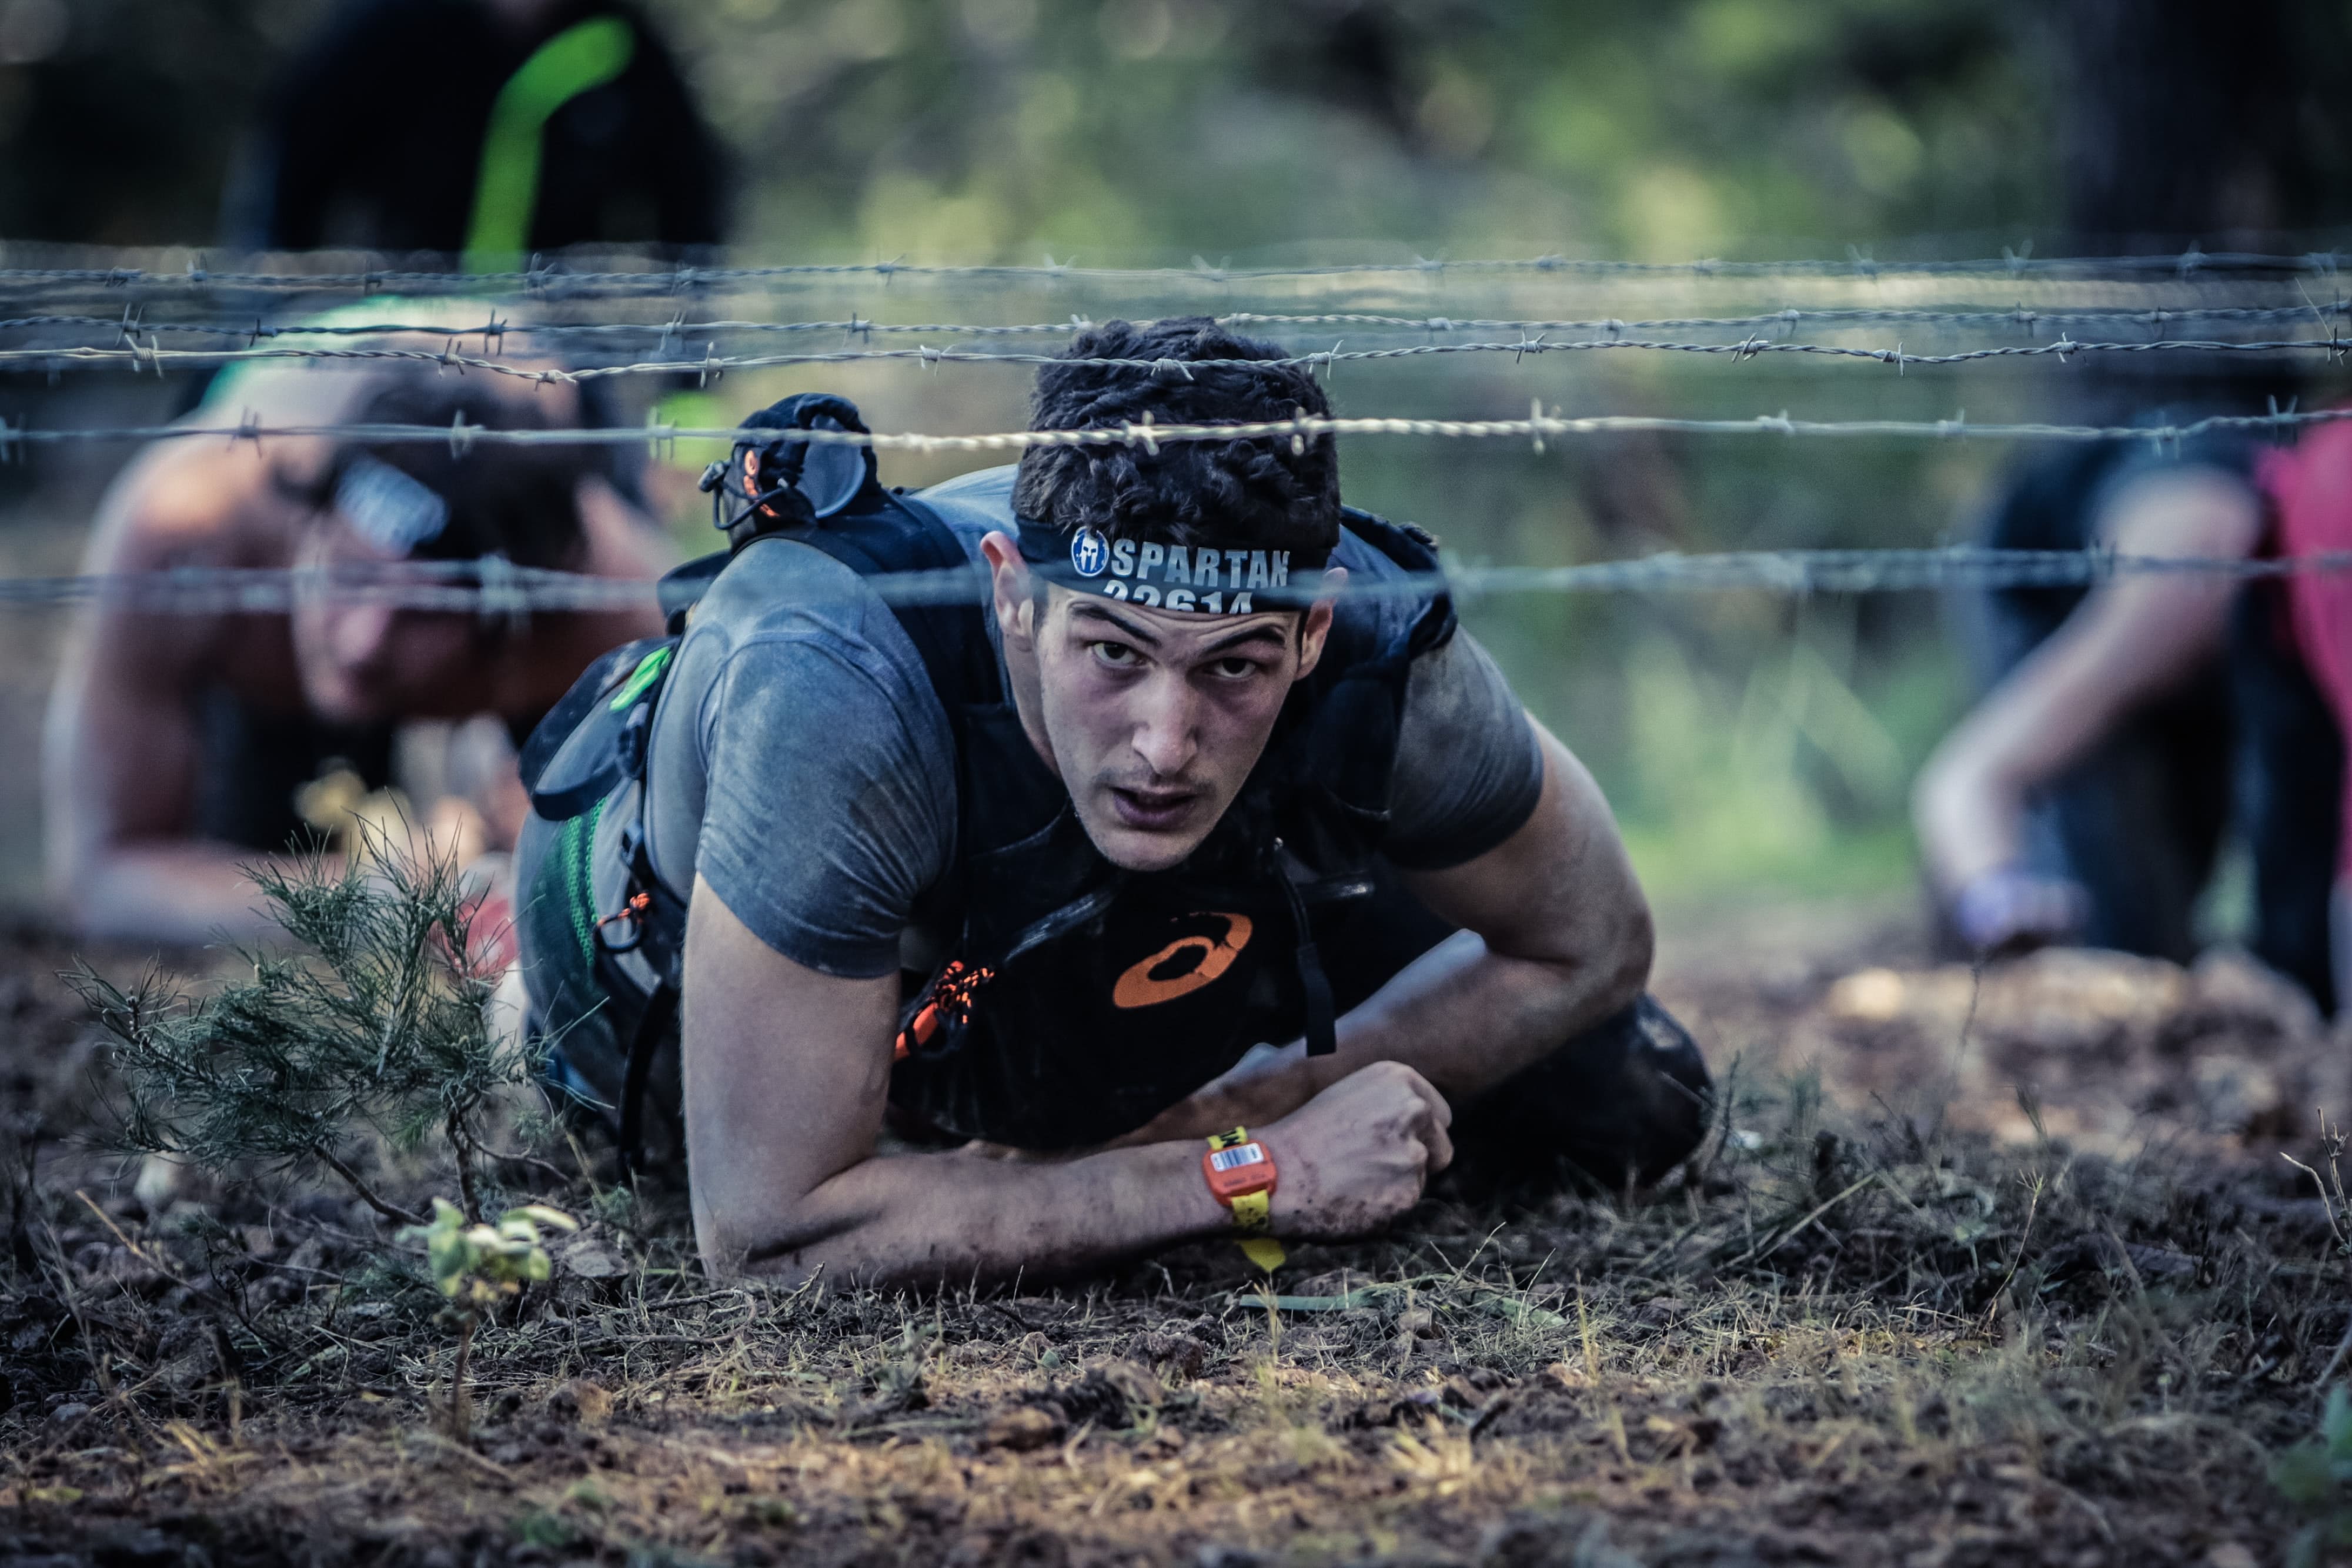 Spartan racer powered by hydrolyzed collagen peptides is going through an obstacle